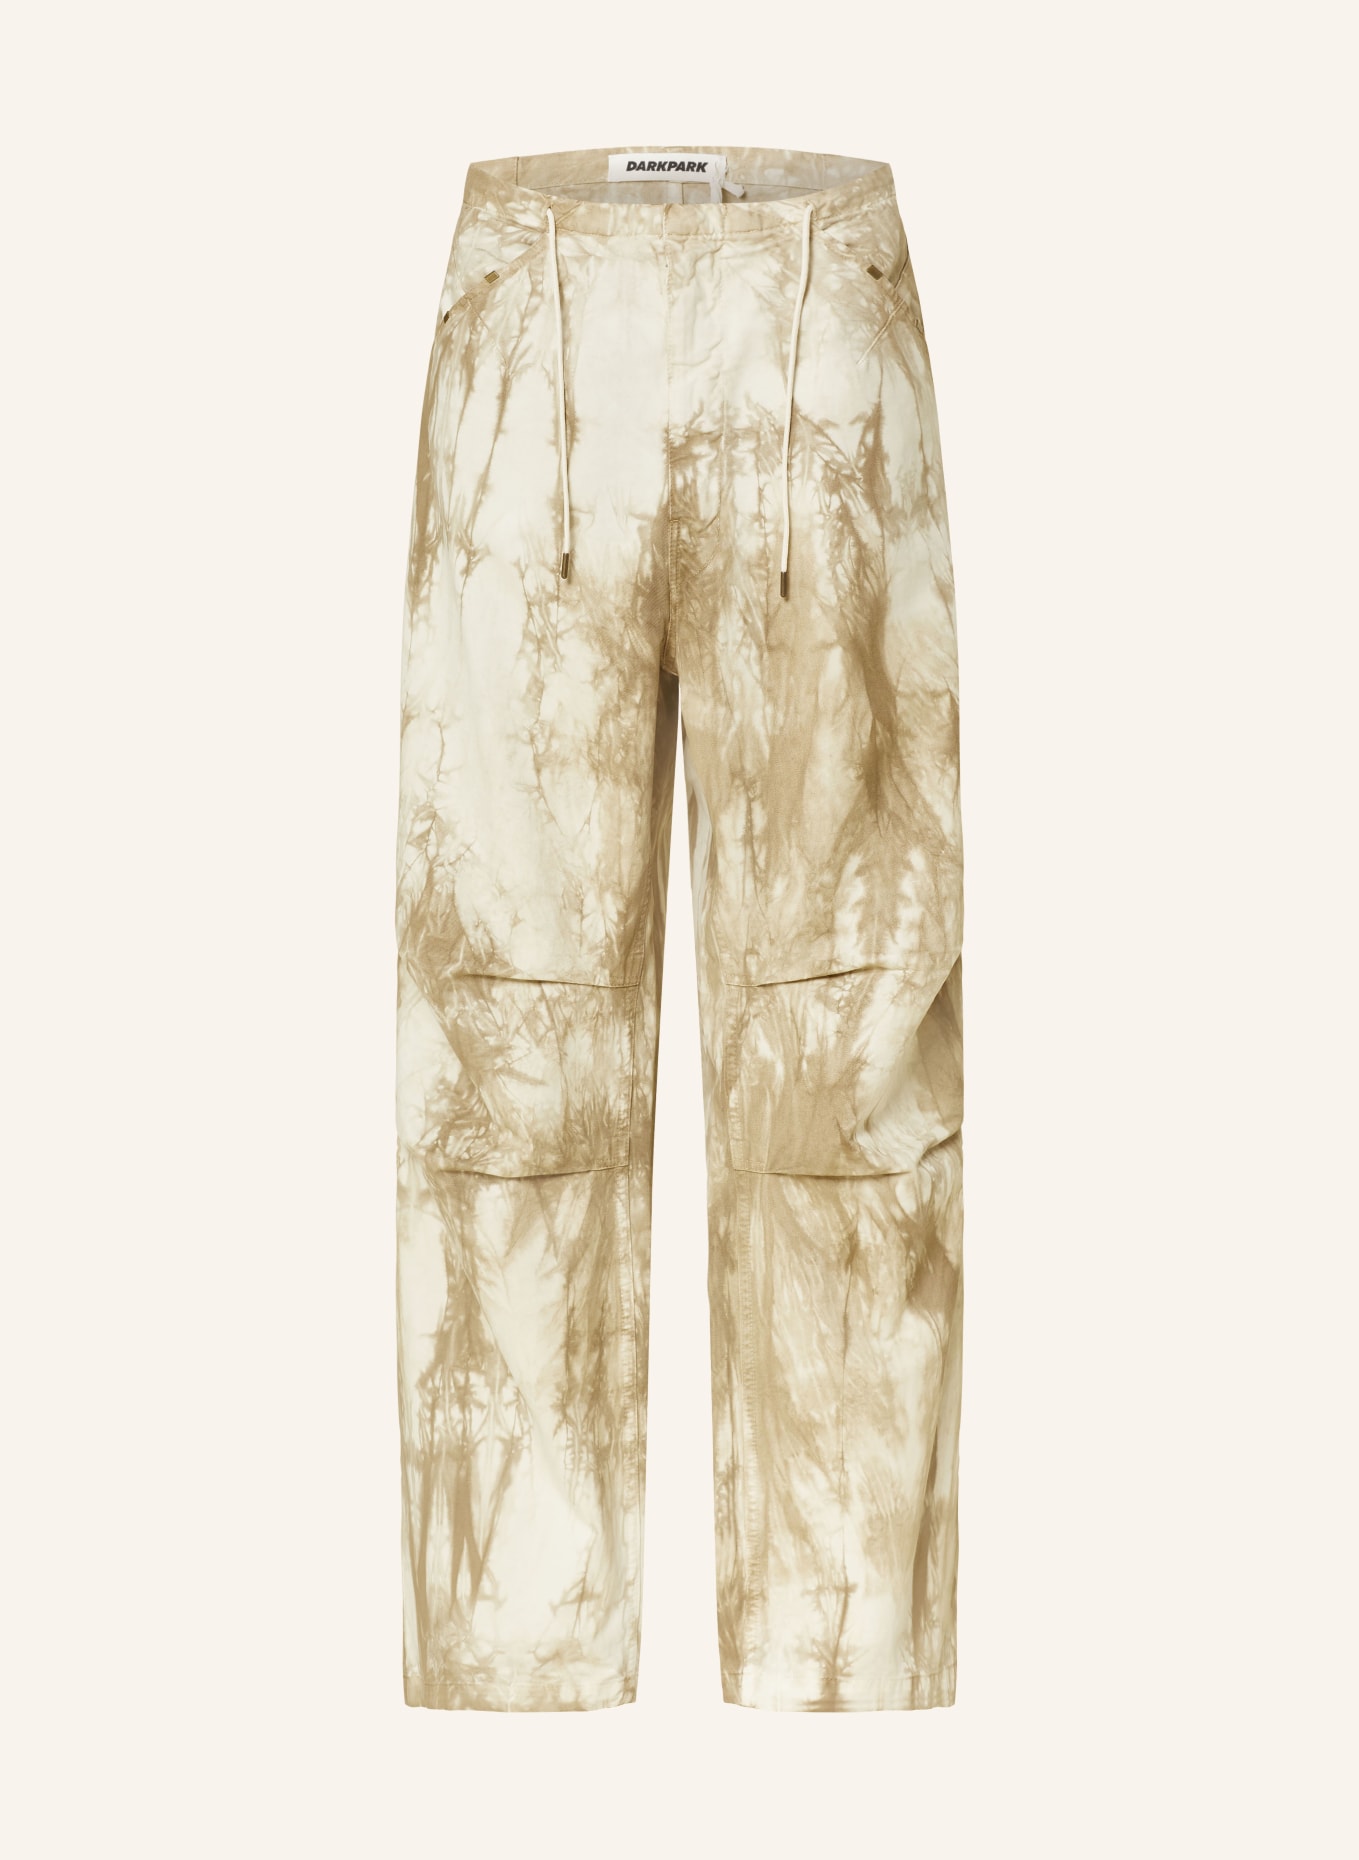 DARKPARK Trousers DAISY, Color: BEIGE/ LIGHT BROWN (Image 1)